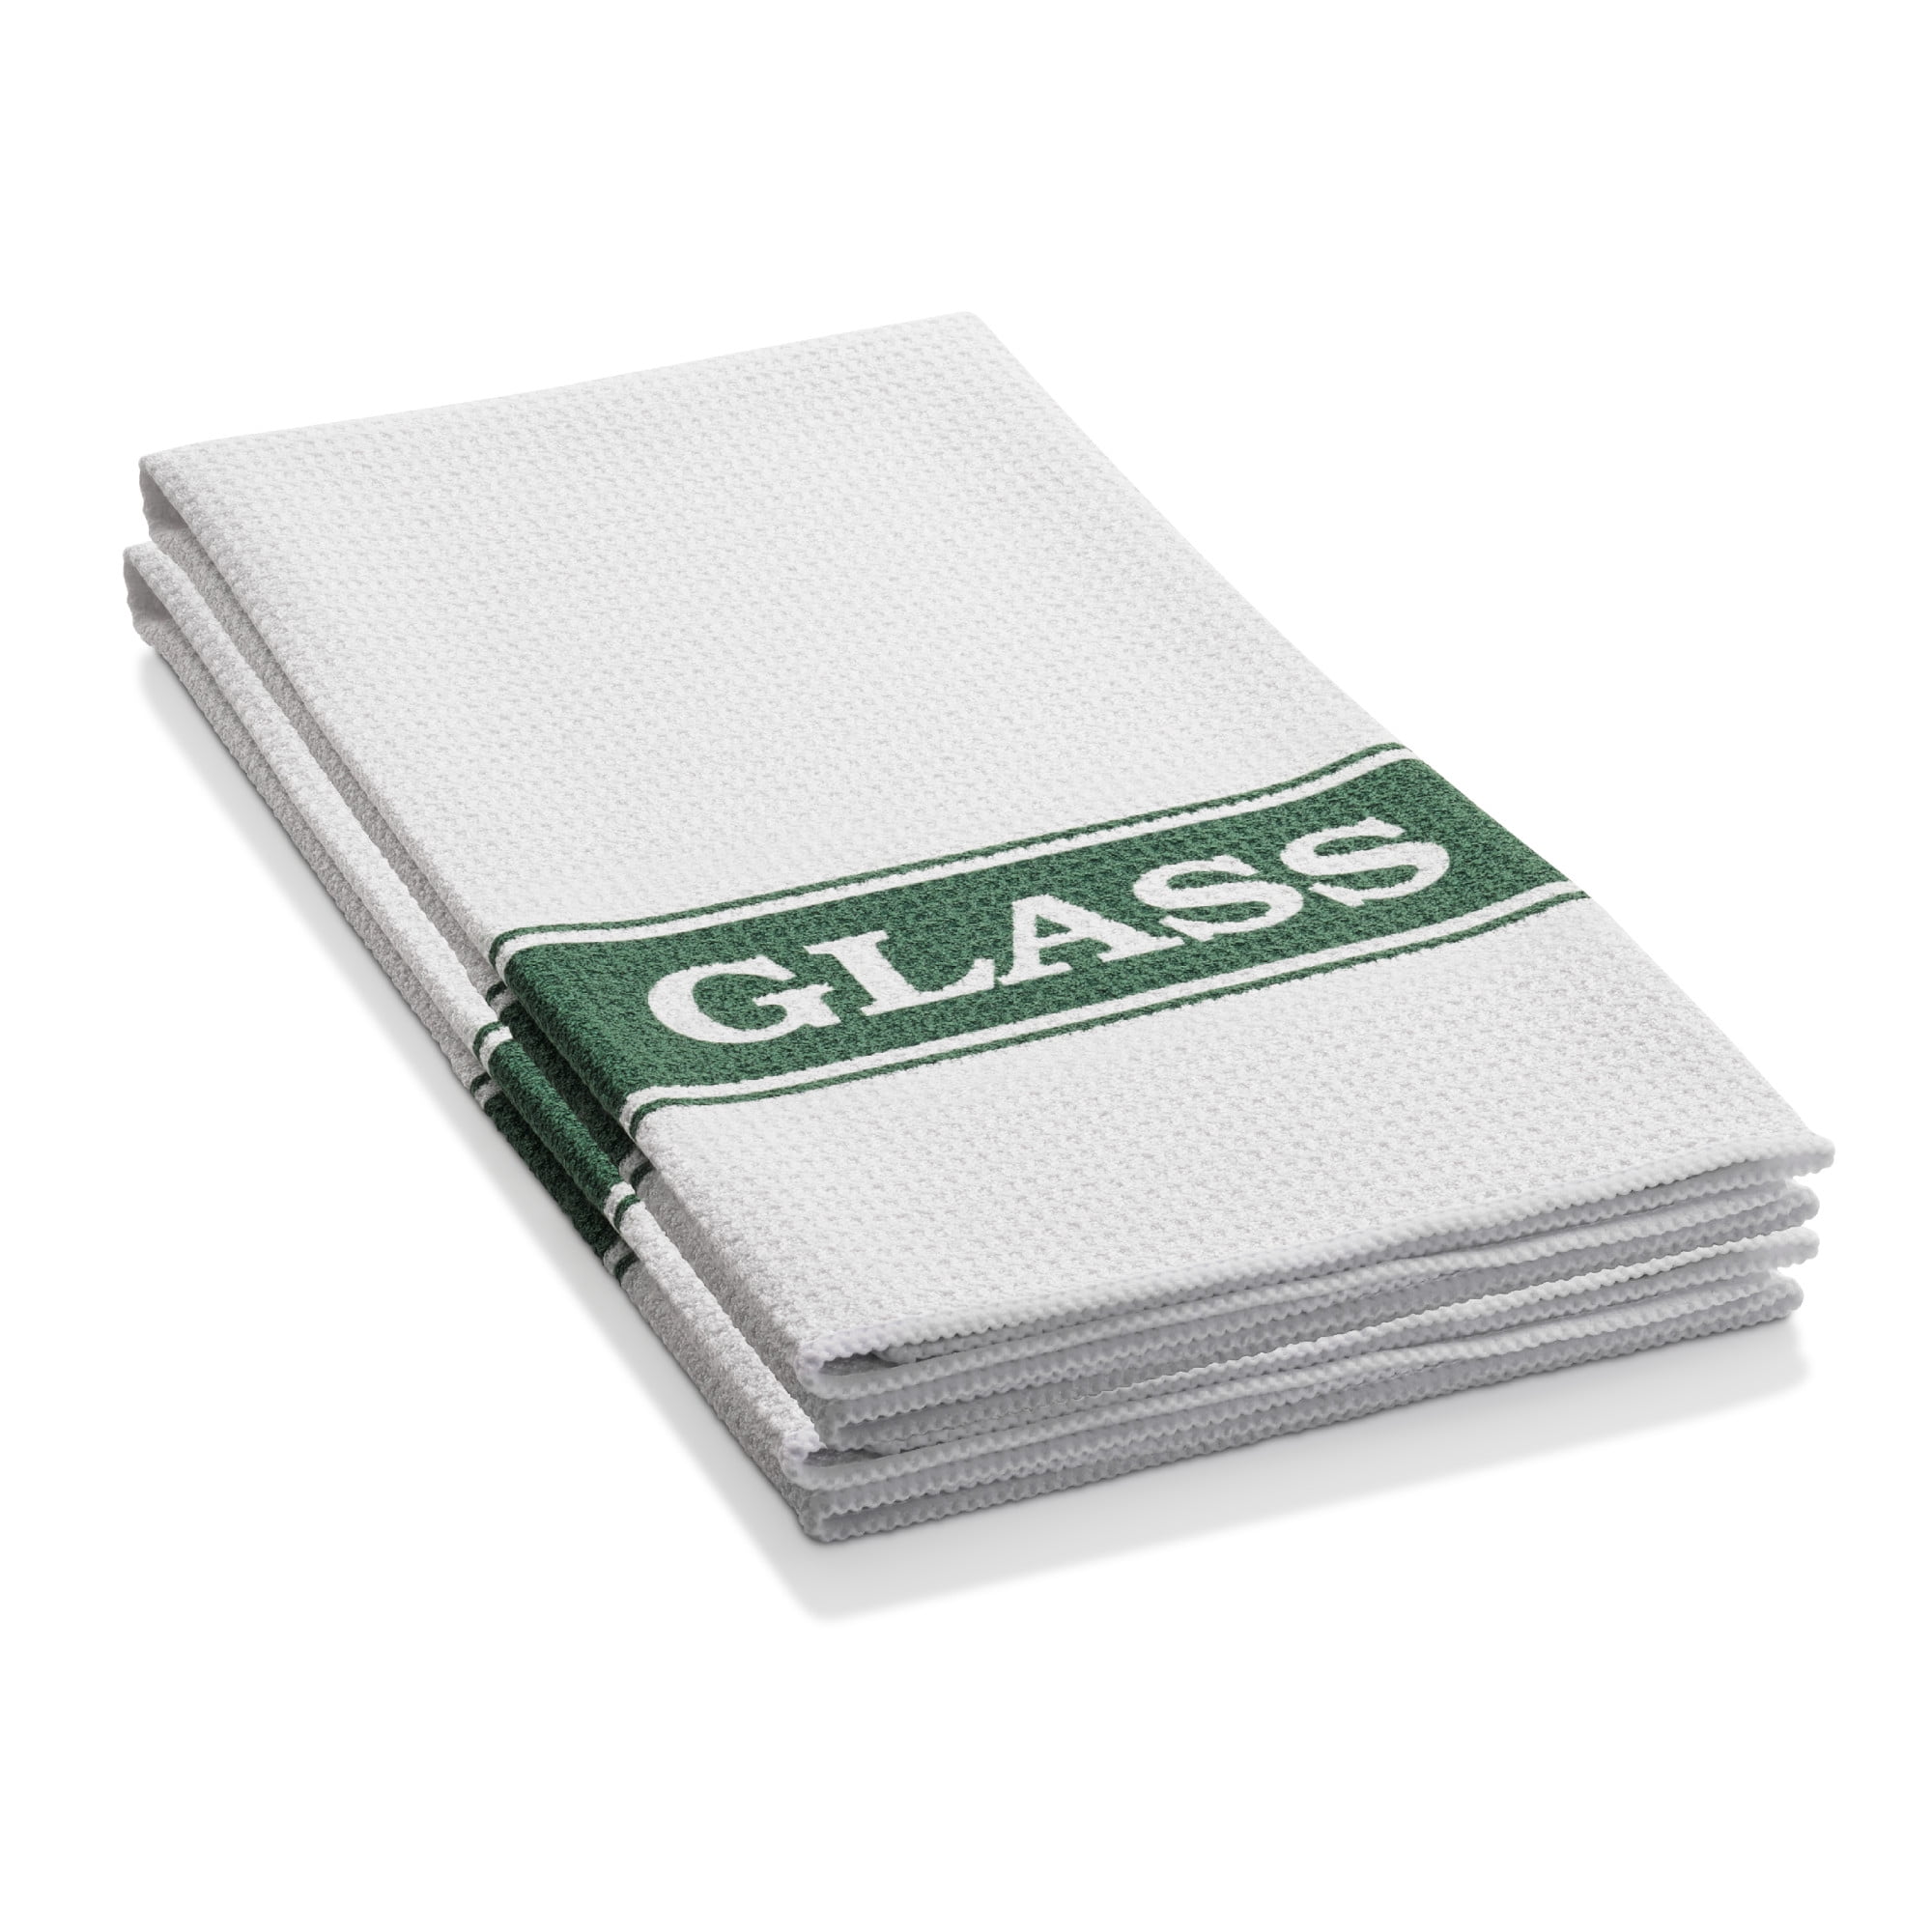 NEW Polyamide Cleaning Cloth 2-Pack 10644 E-CLOTH Wash And Wipe Polyester 